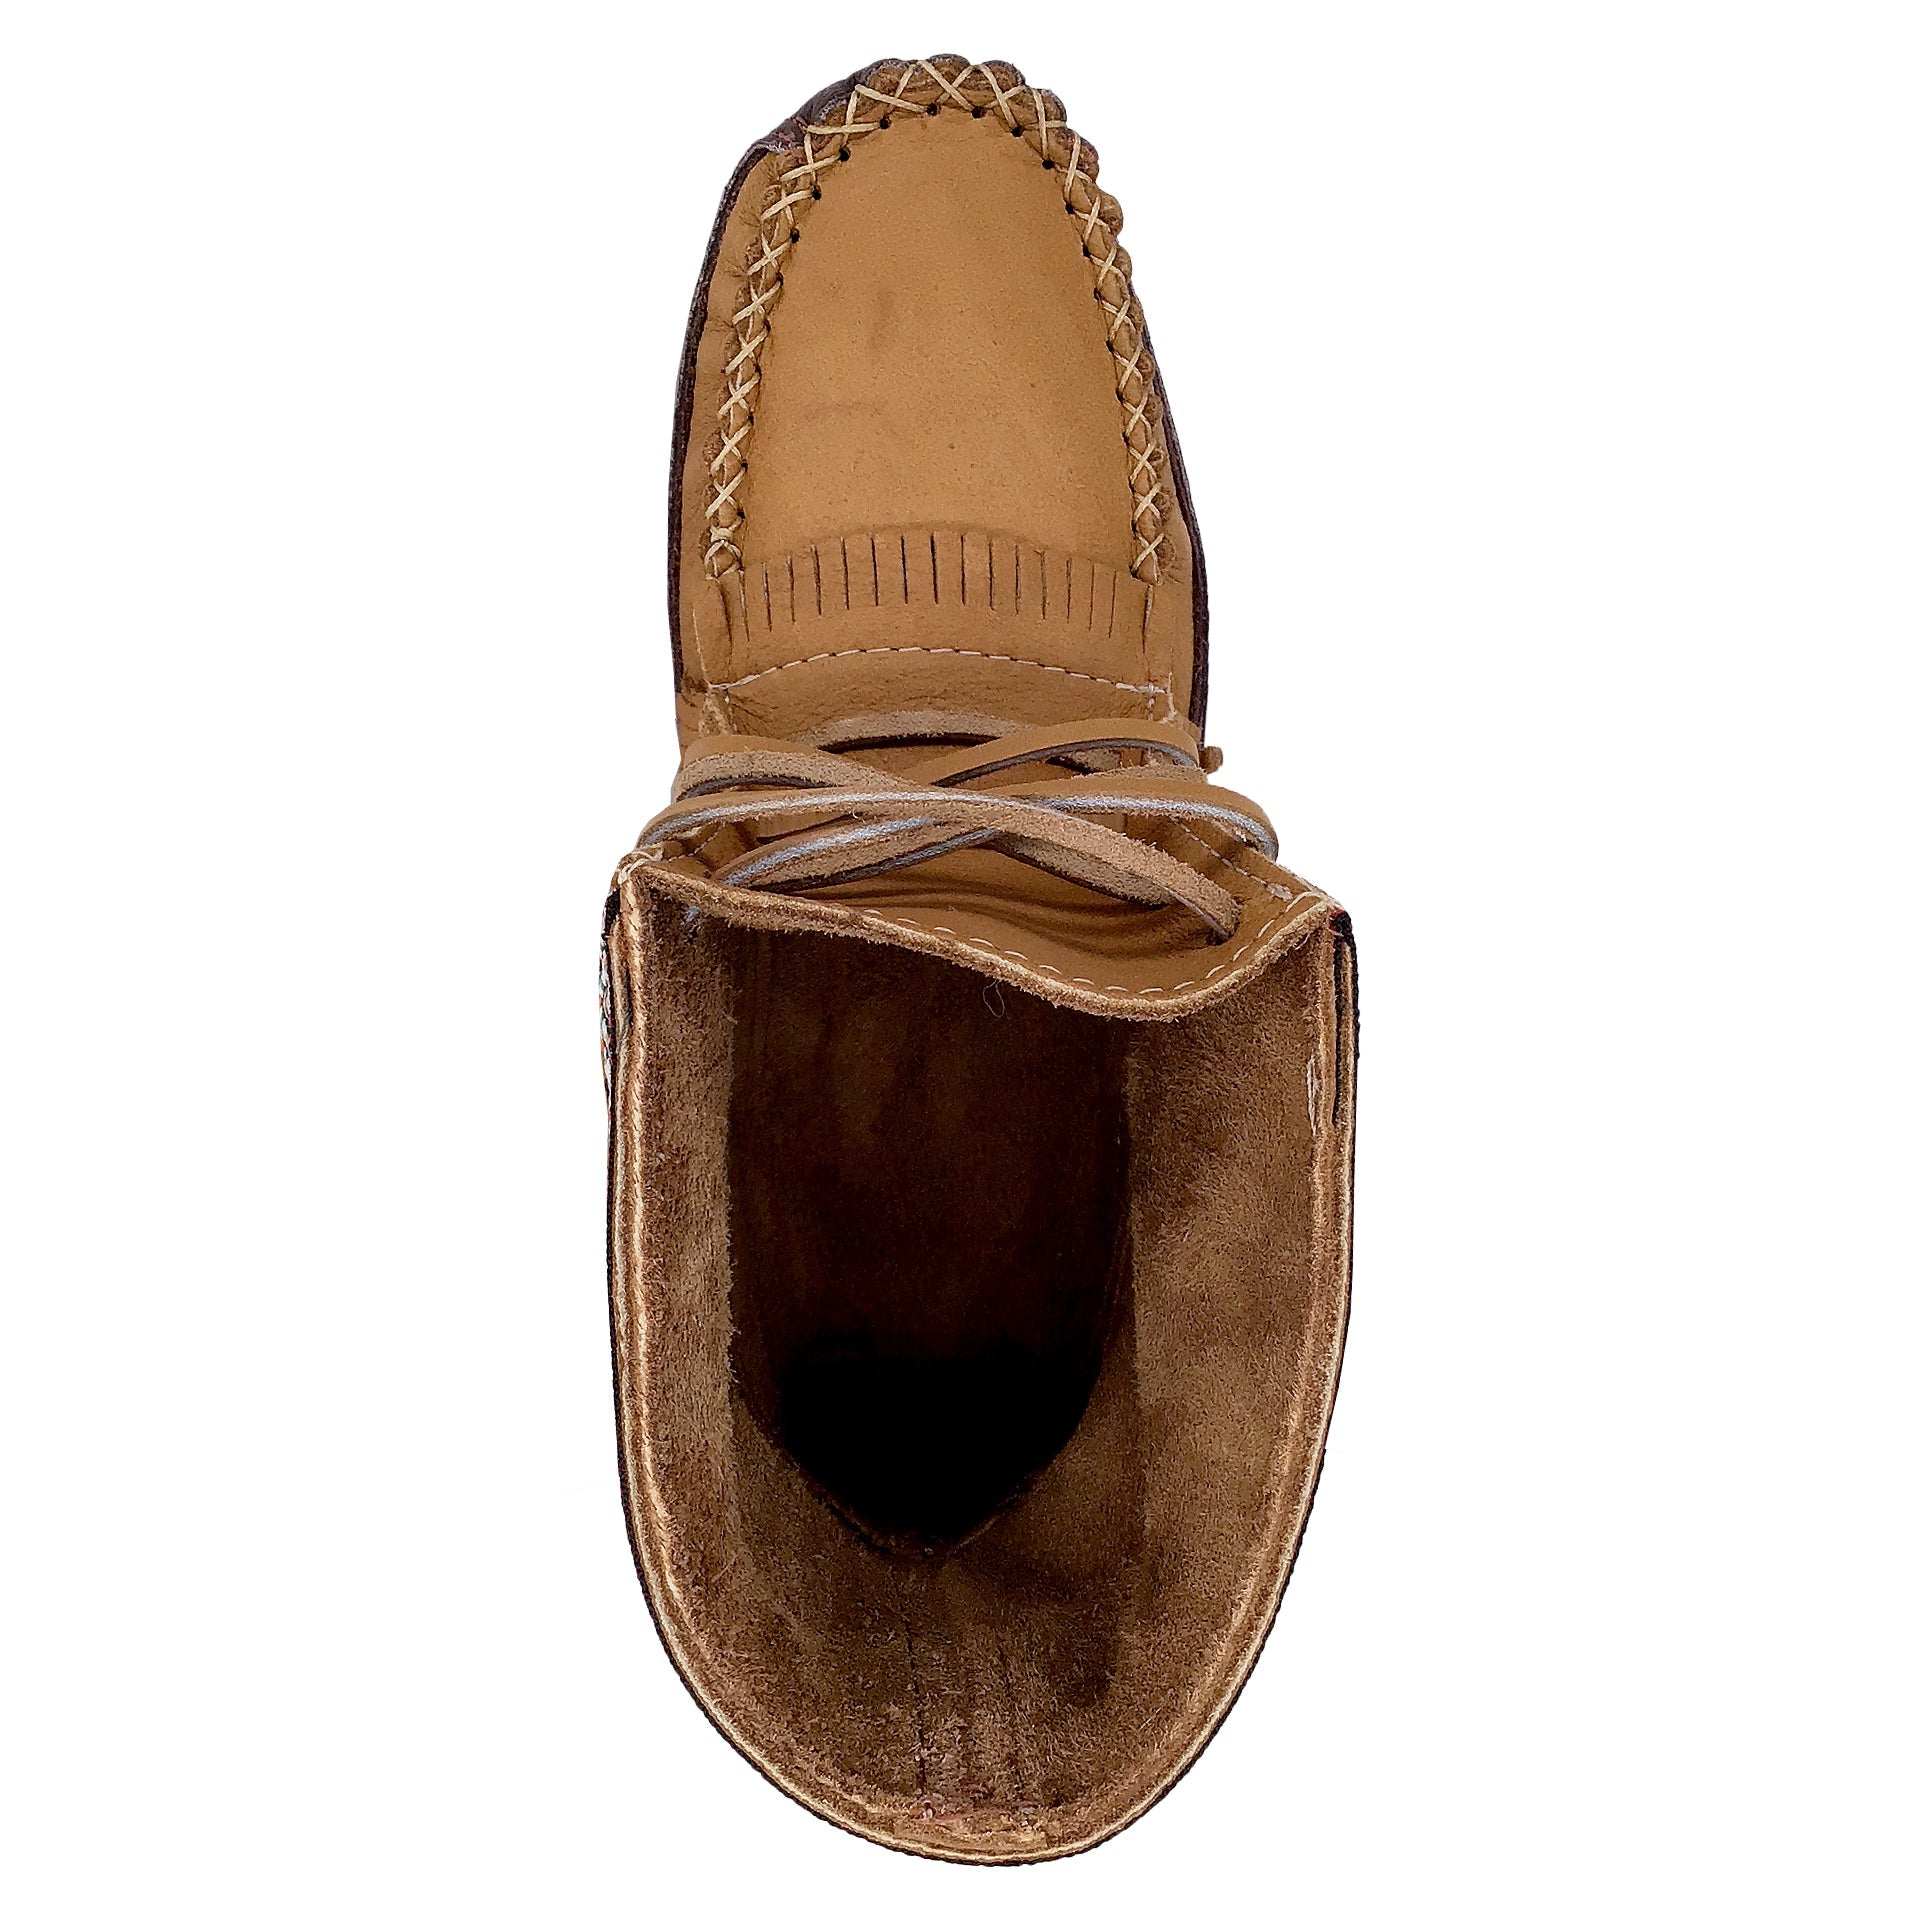 Women's Earthing Moccasin Boots